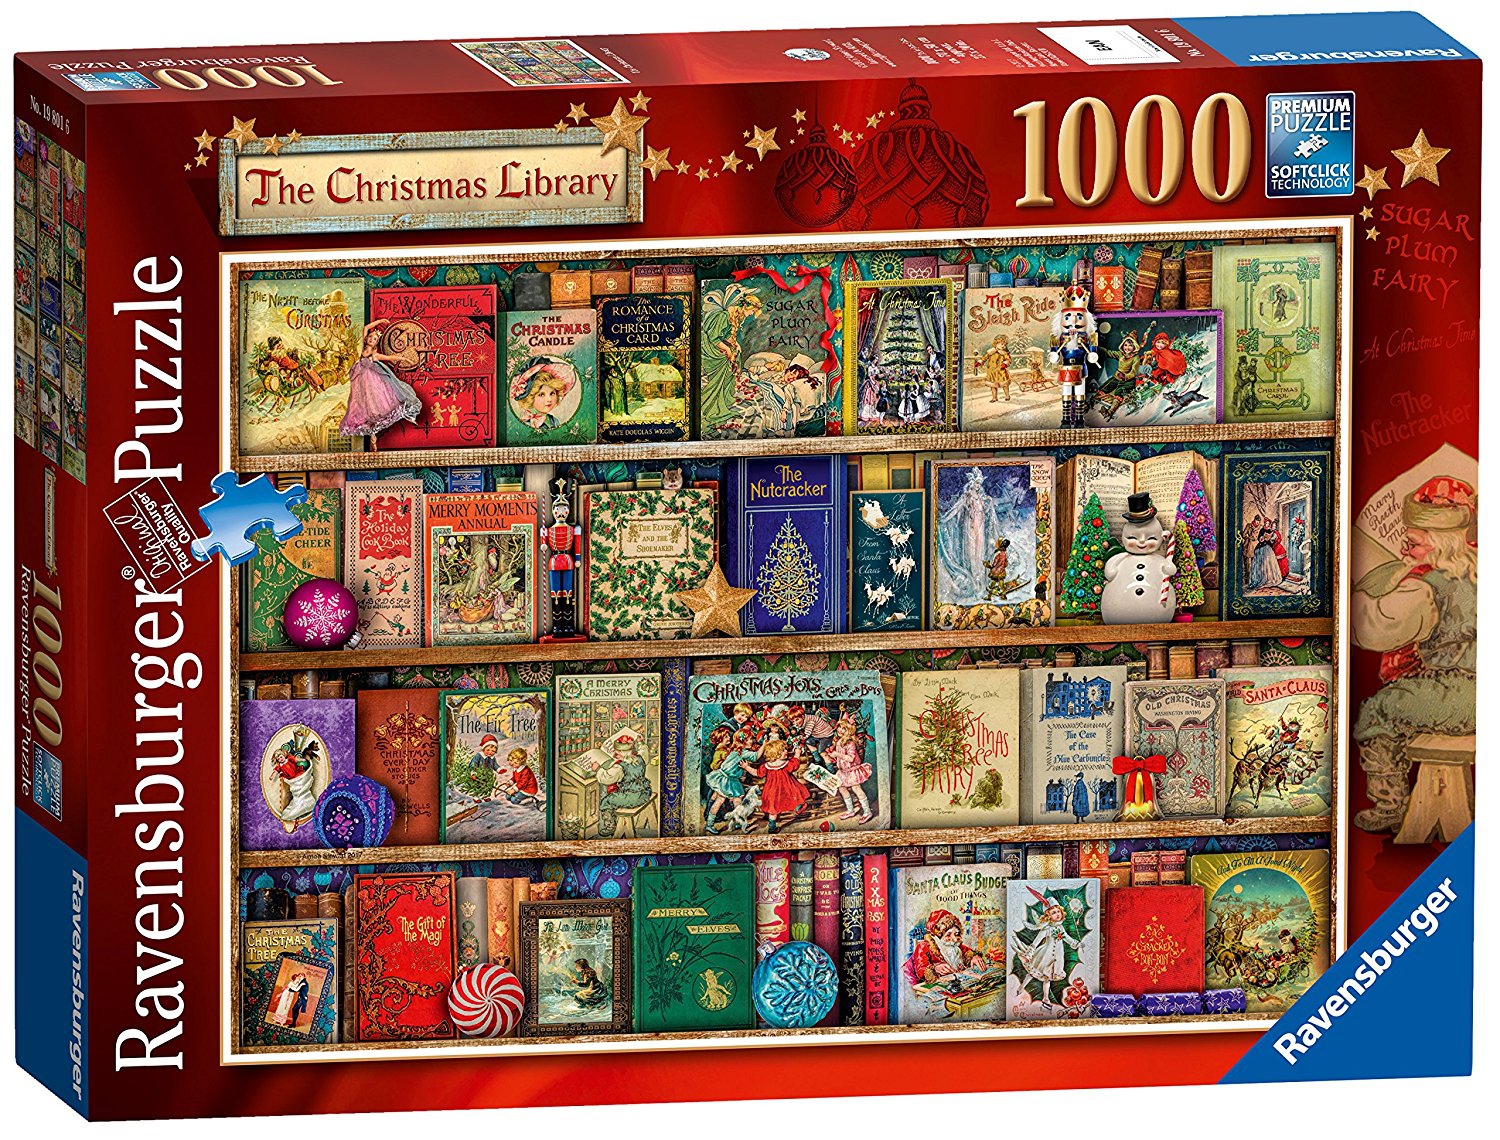 The Christmas Library 1000 Piece Jigsaw Puzzle Game